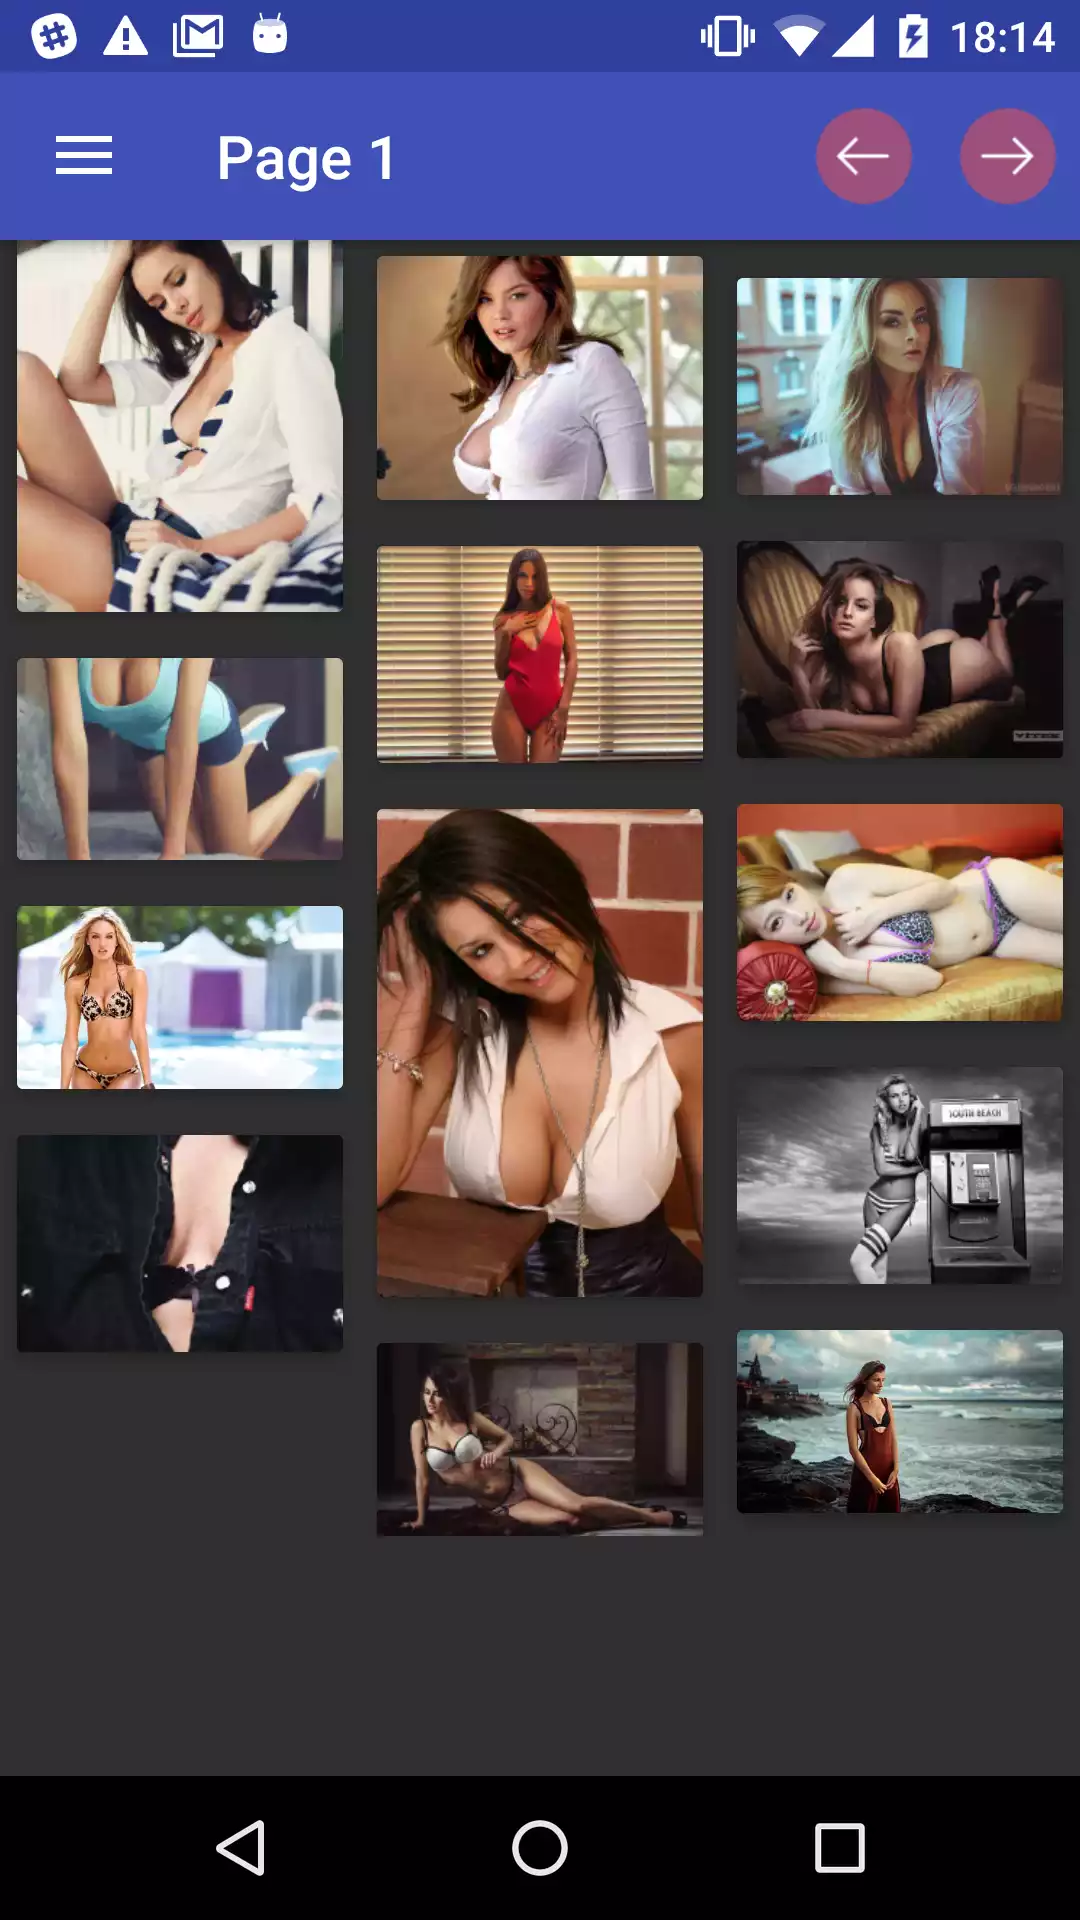 Cleavage Backgrounds sexy,apps,apk,new,henati,download,porn,picture,android,photos,hentia,app,viewer,pic,girls,futanari,gallery,images,henrai,hentai,wallpapers,backgrounds